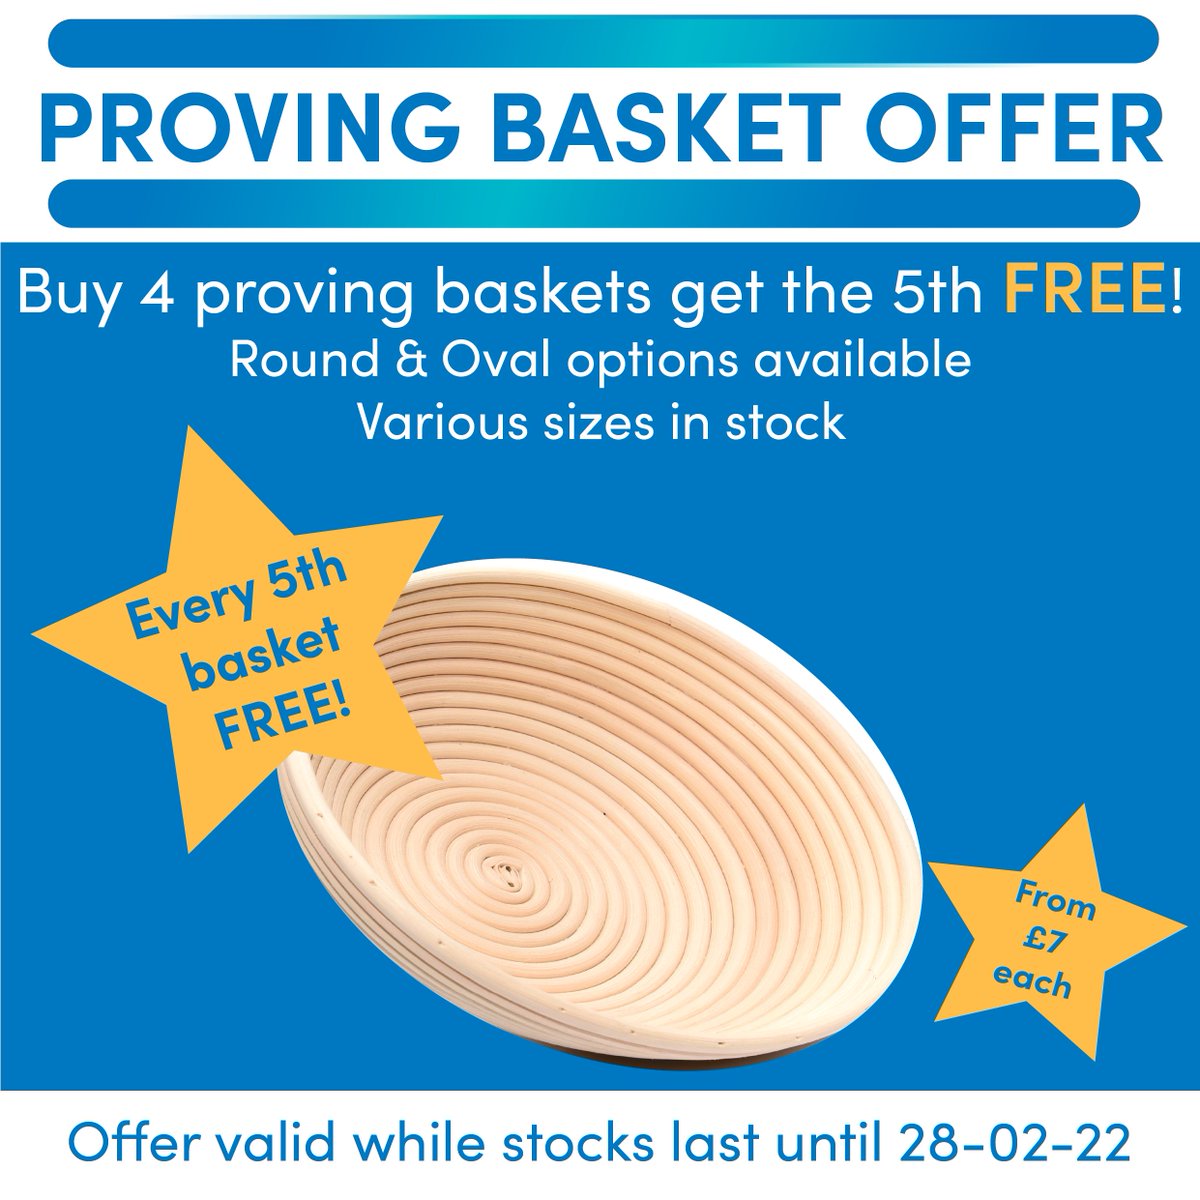 📣 PROVING BASKET OFFER 📣 Buy 4 proving baskets get the 5th FREE! Call today on 01984 640 401, option 1 to order. 📞We are ready for your call! #provingbakets #offer #bakerysupplies #bakery #baking #febdeals